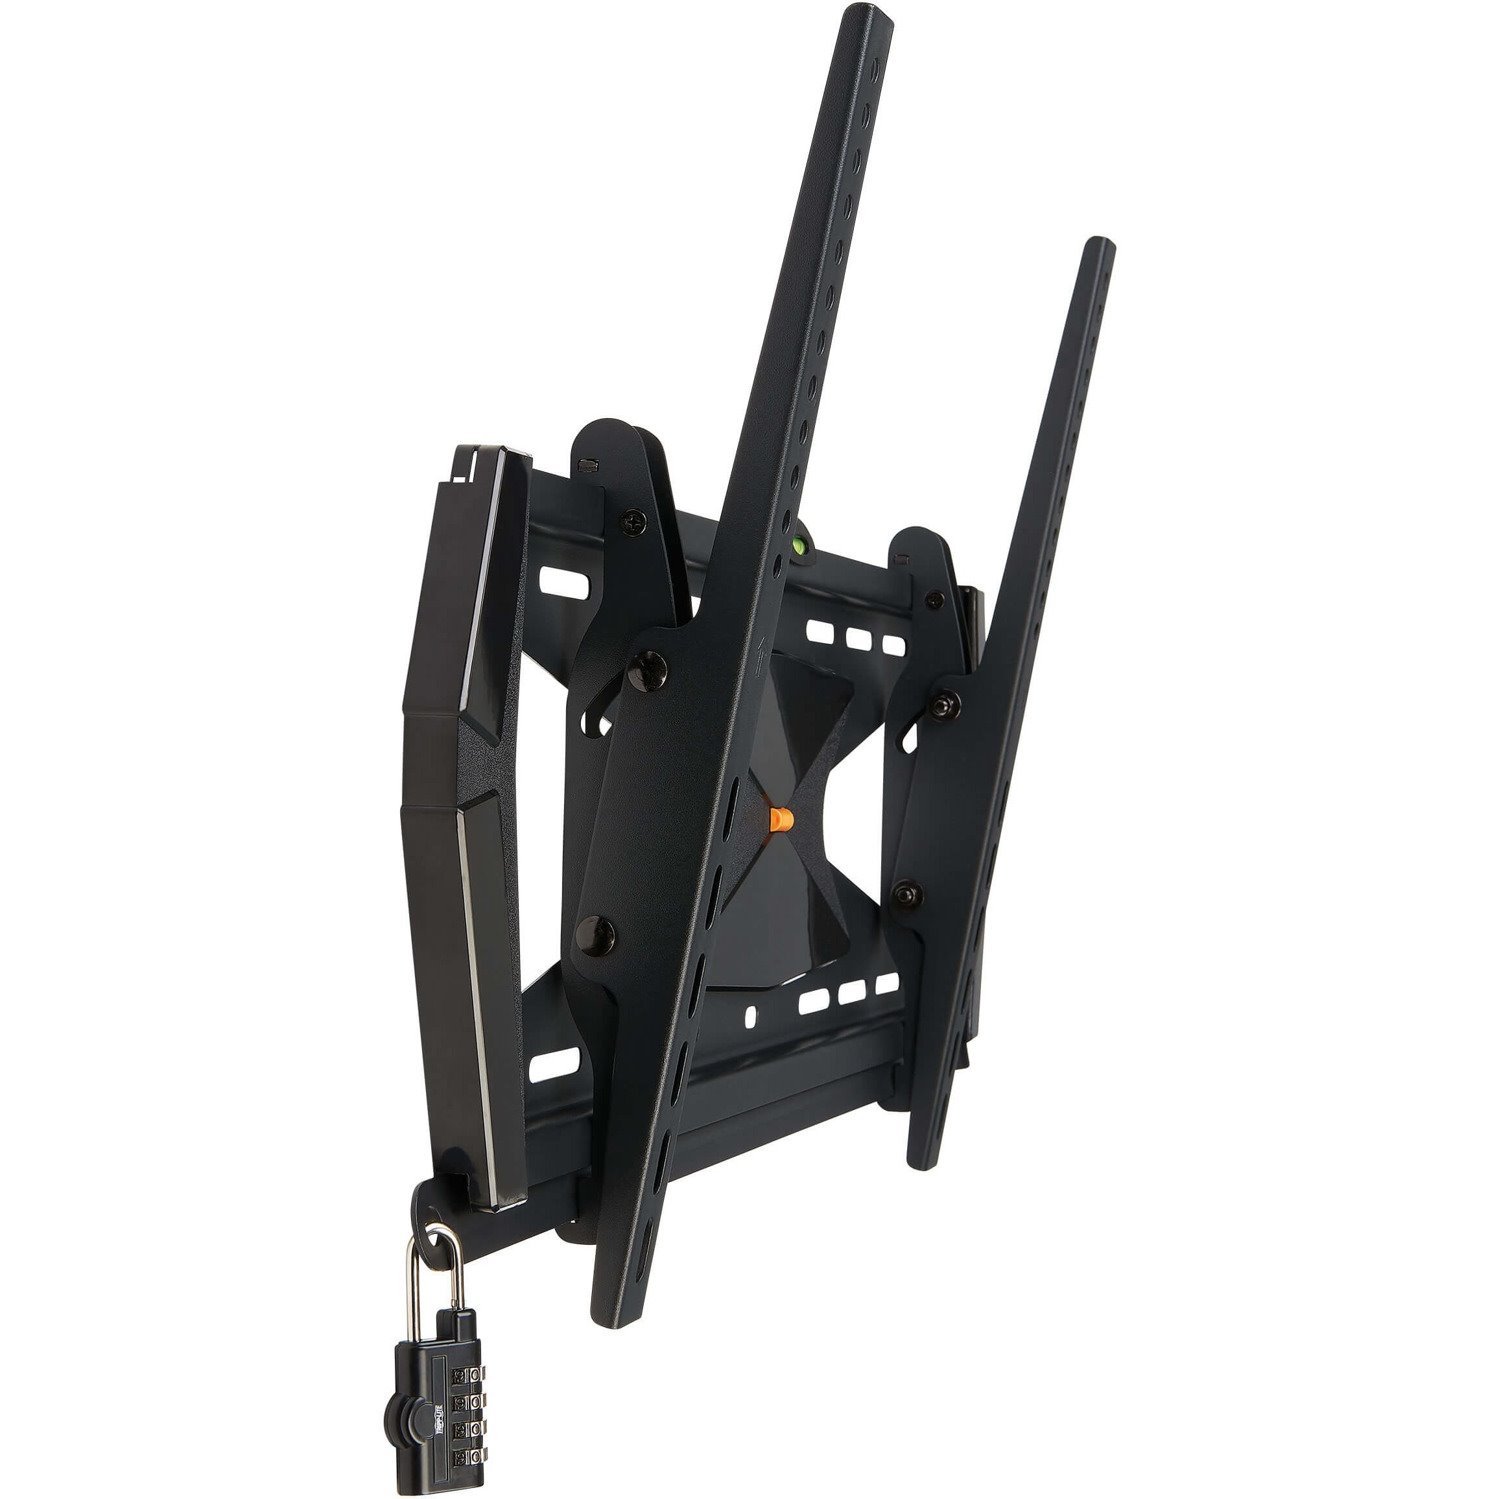 Tripp Lite by Eaton Heavy-Duty Tilt Security Wall Mount for 37" to 80" TVs and Monitors, Flat or Curved Screens, UL Certified